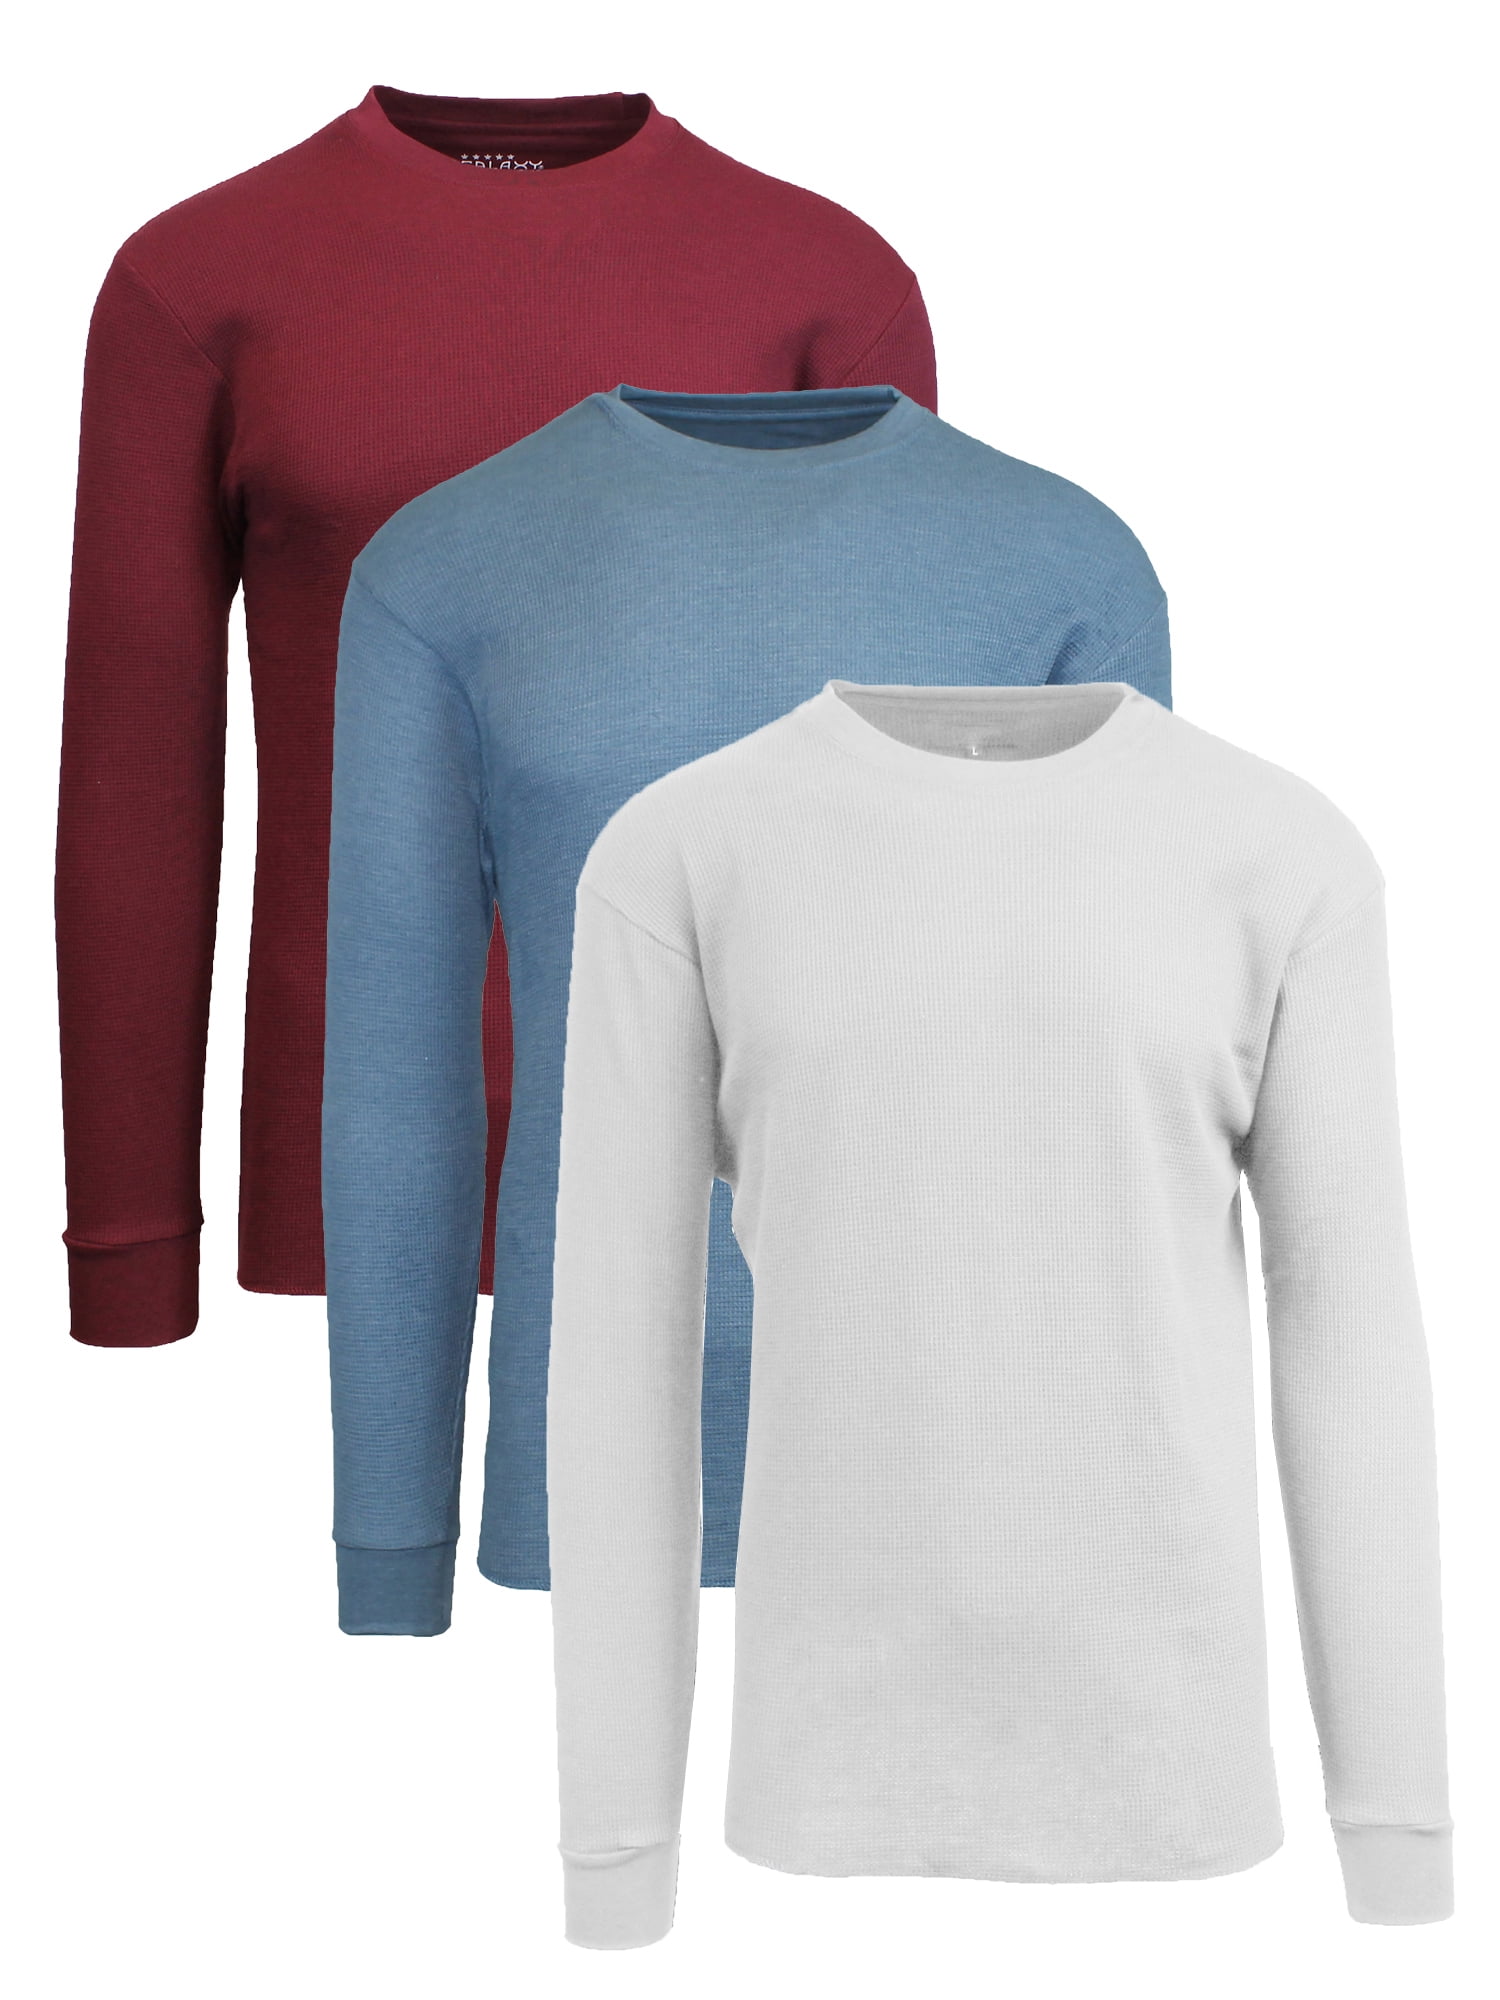 3-Pack Men's Long Sleeve Thermal Shirts (S-5XL)